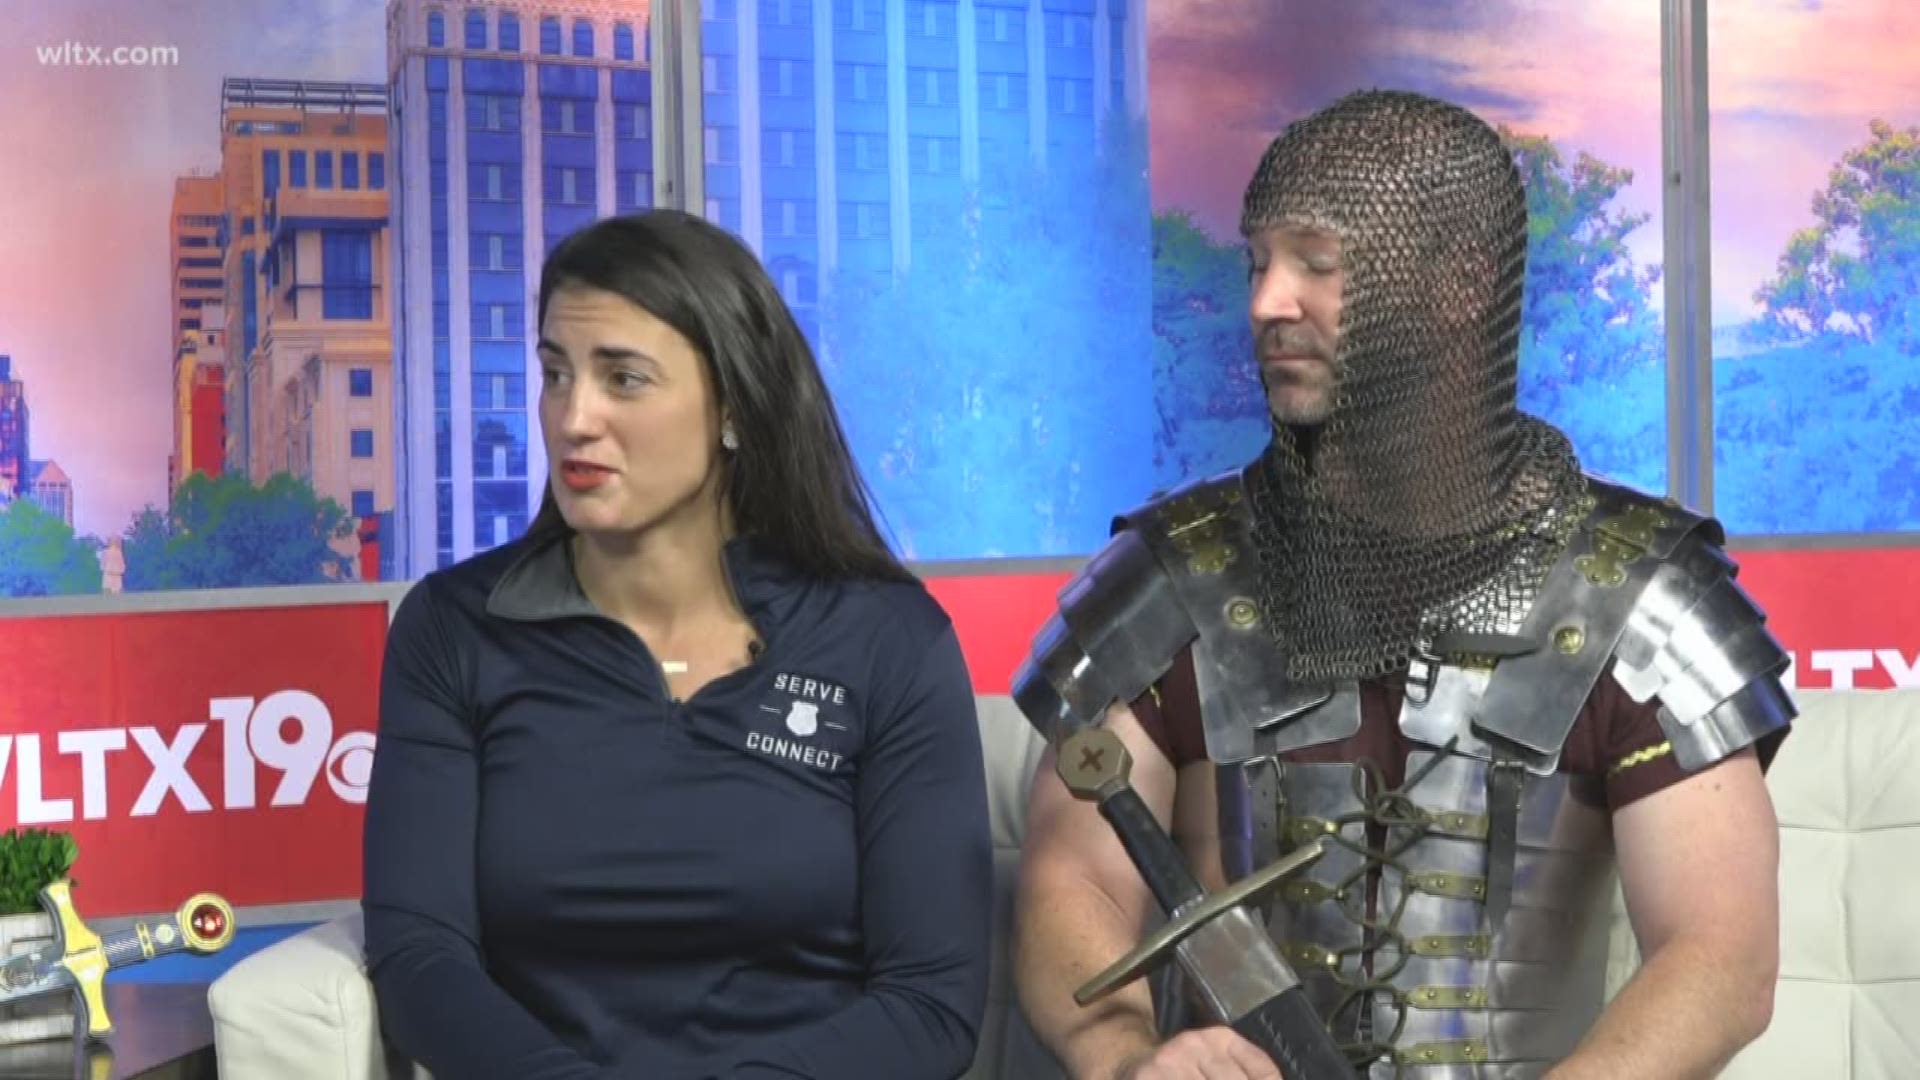 A 'Knight of Honor' gala is right around the corner and it helps the community. Event organizer Kassy Alia explains how people can get involved.